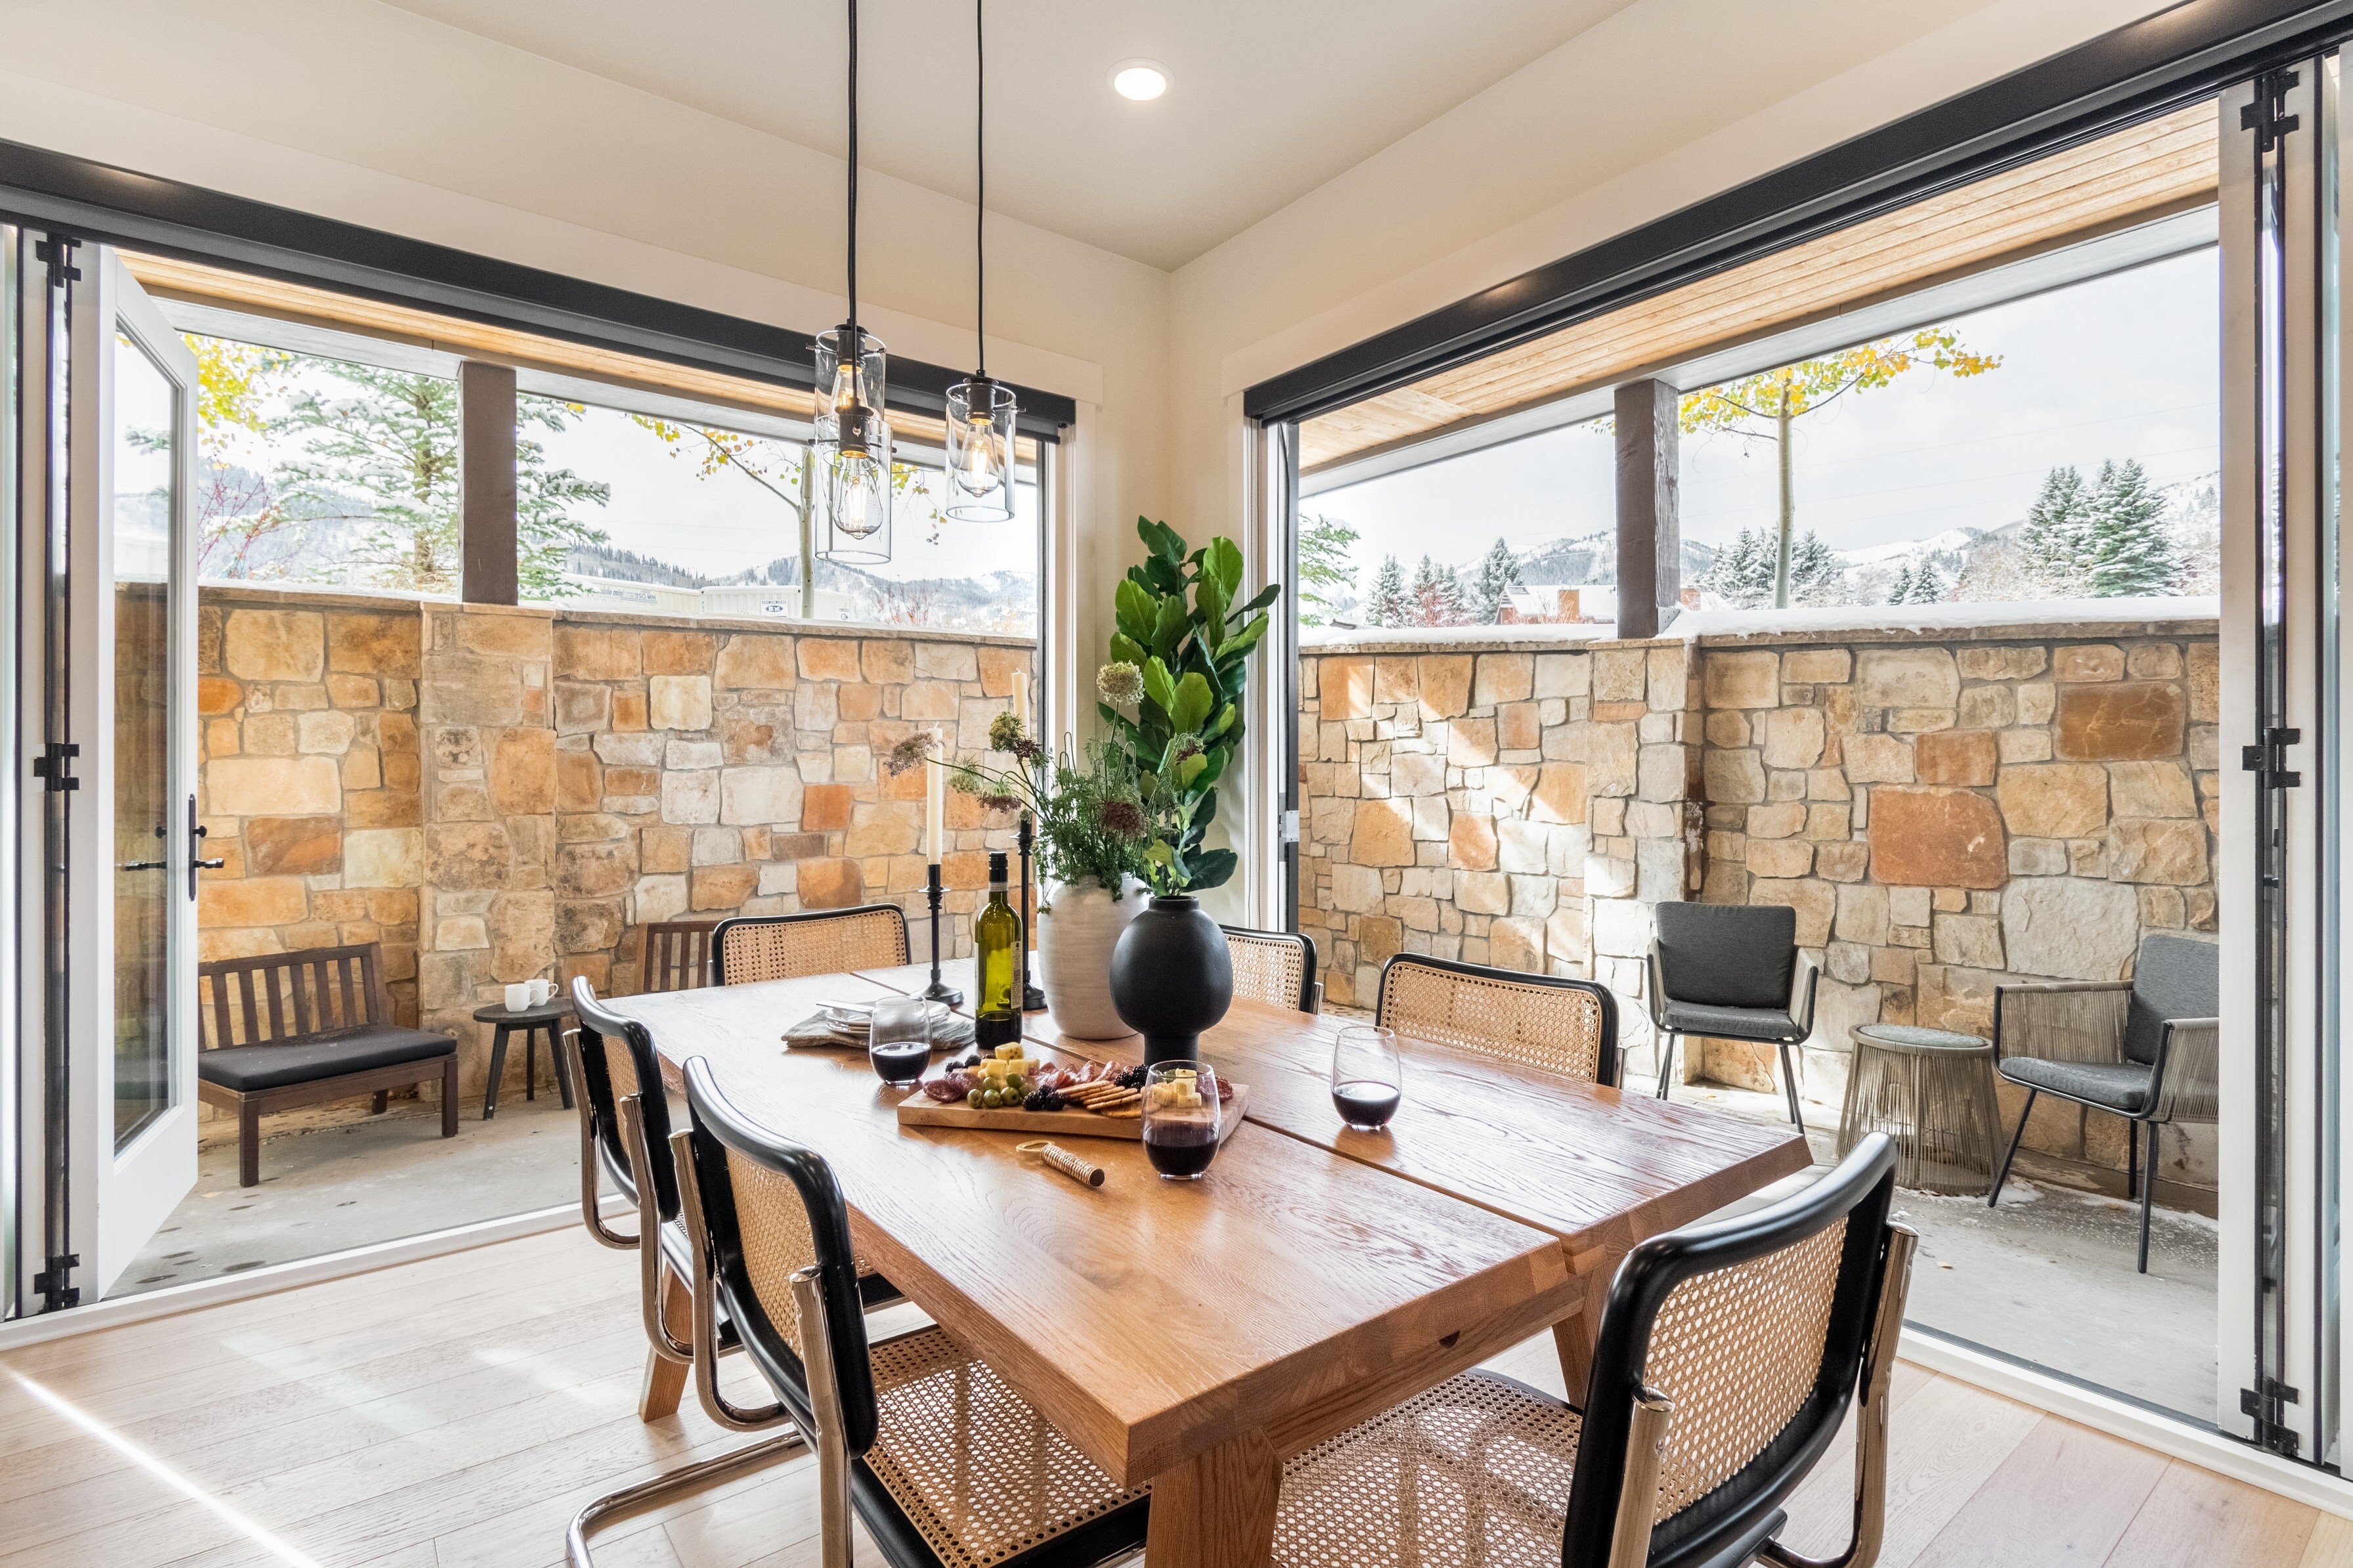 Dining table is surrounded by large doors leading to the patio.